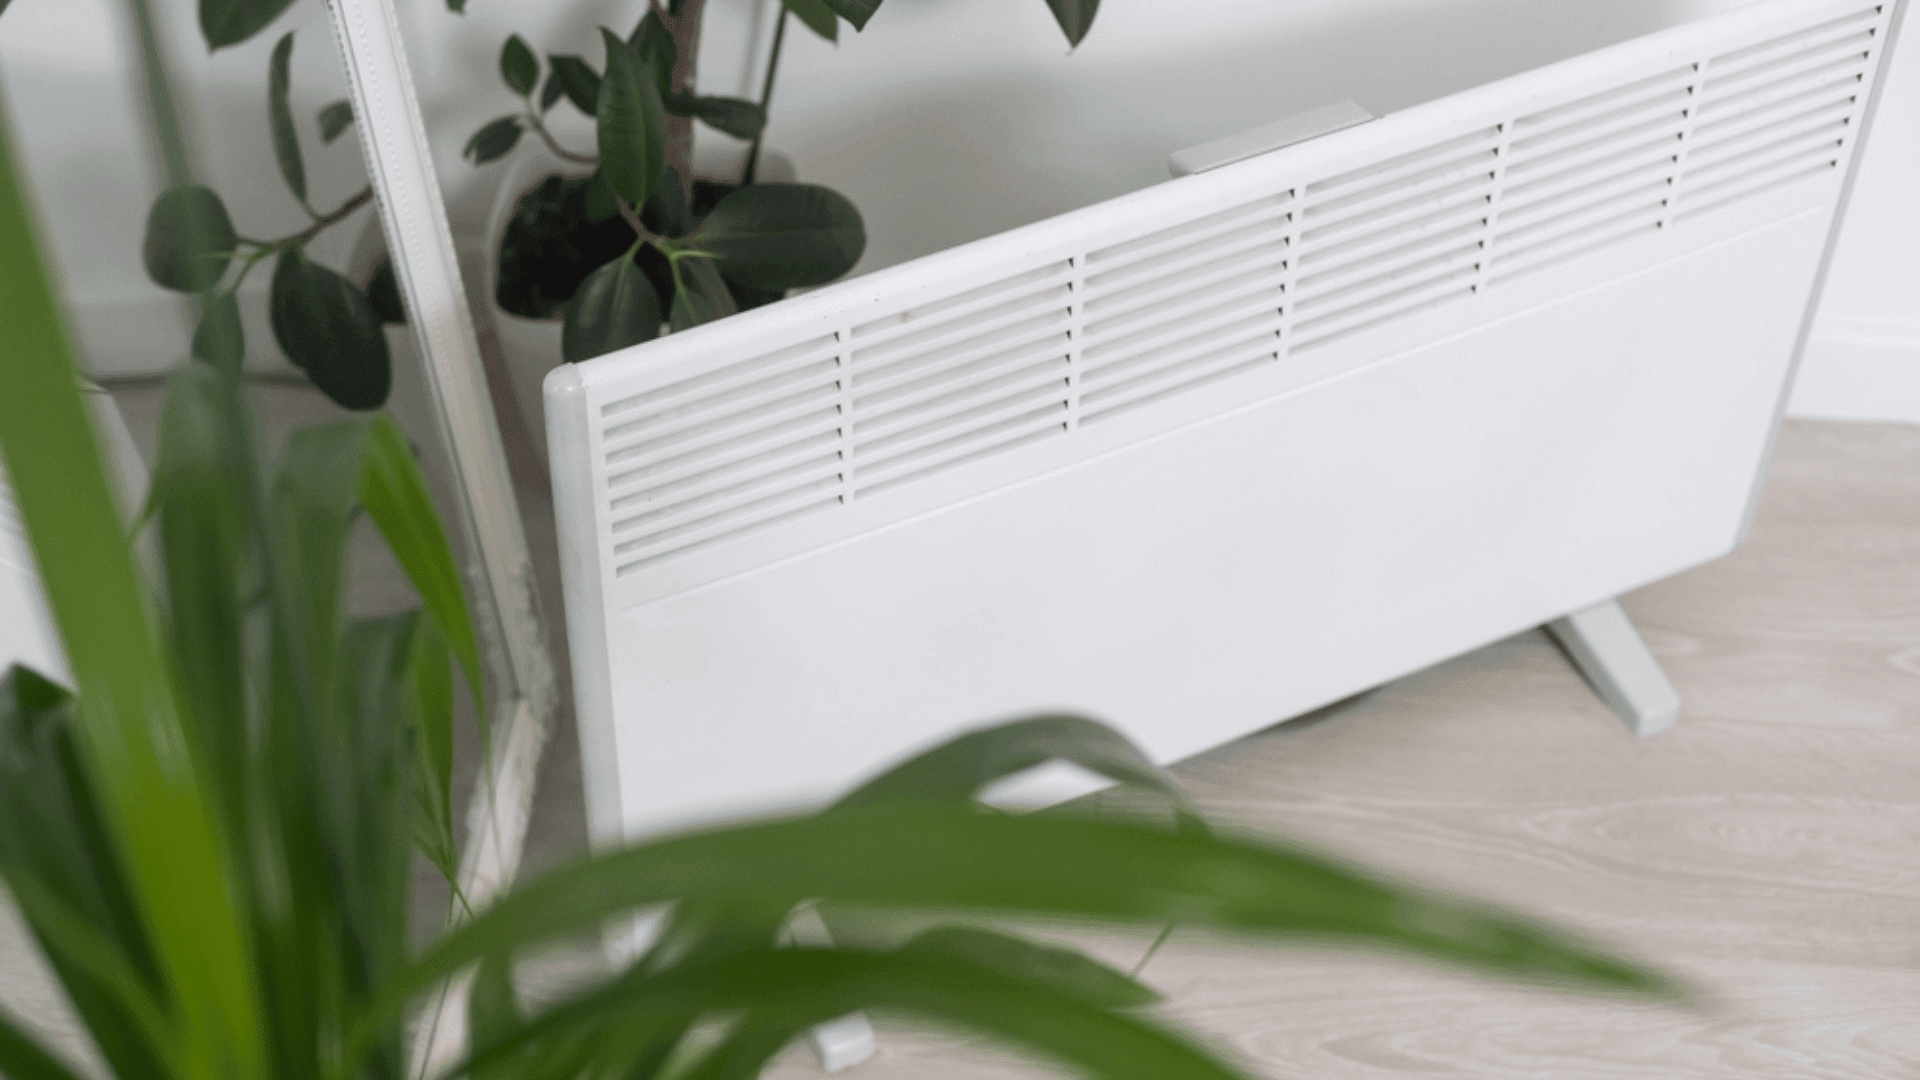 Radiator Protect Houseplants From Heating in the Winter